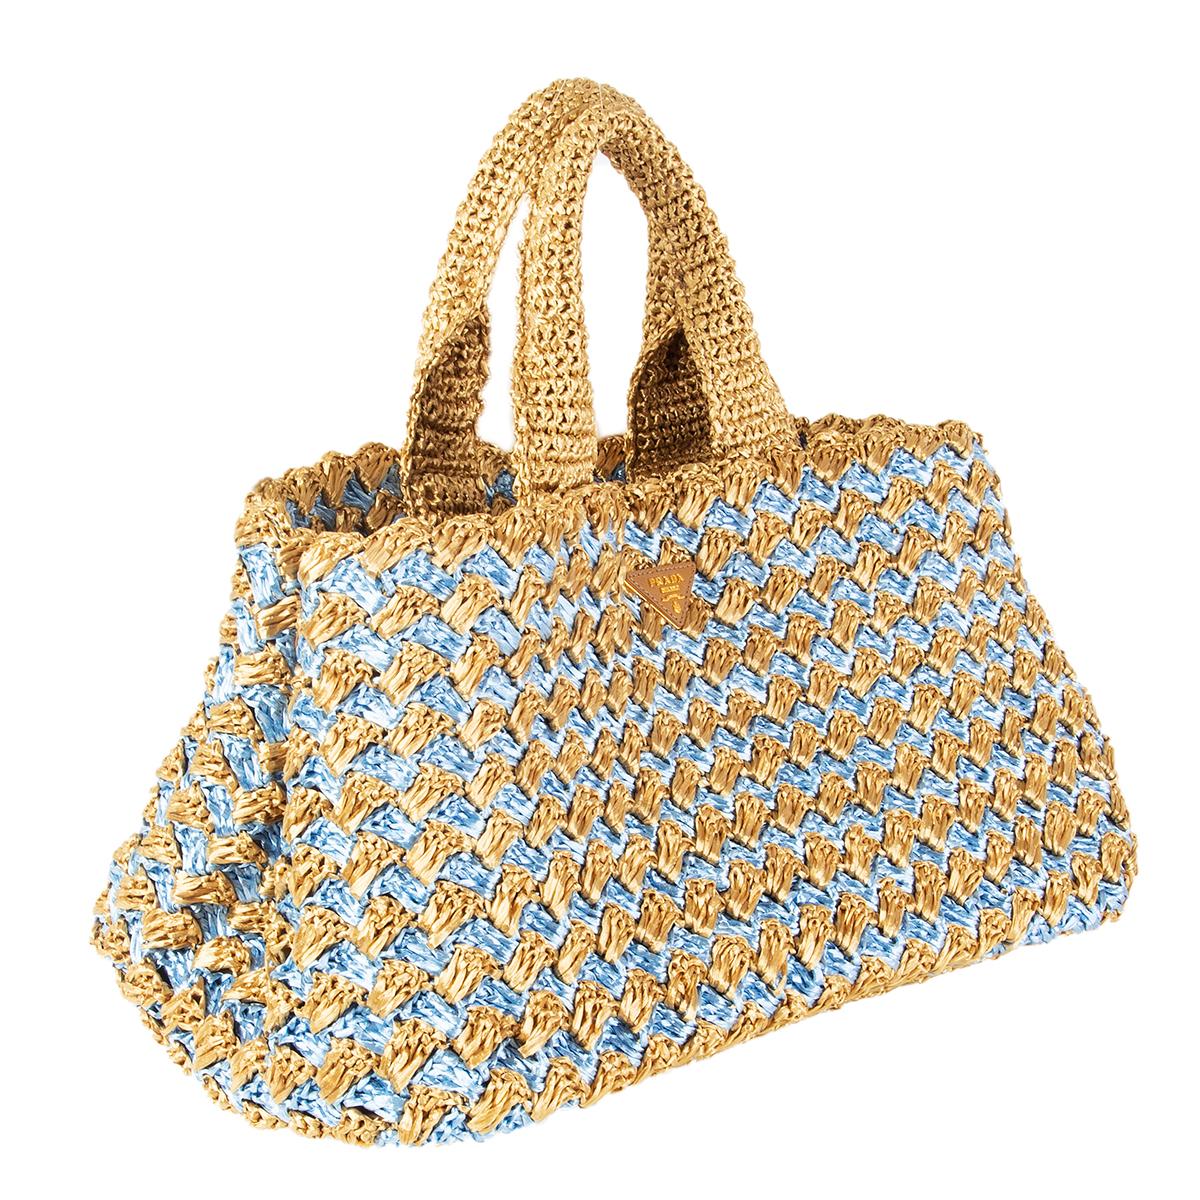 100% authentic Prada 'Canapa' tote in Naturale (beige) and Ciel (baby blue) raffia crochet. Lined in golden-beige nylon with one zip pocket against the back and one against the front with two open pockets attached. Has been carried and is in